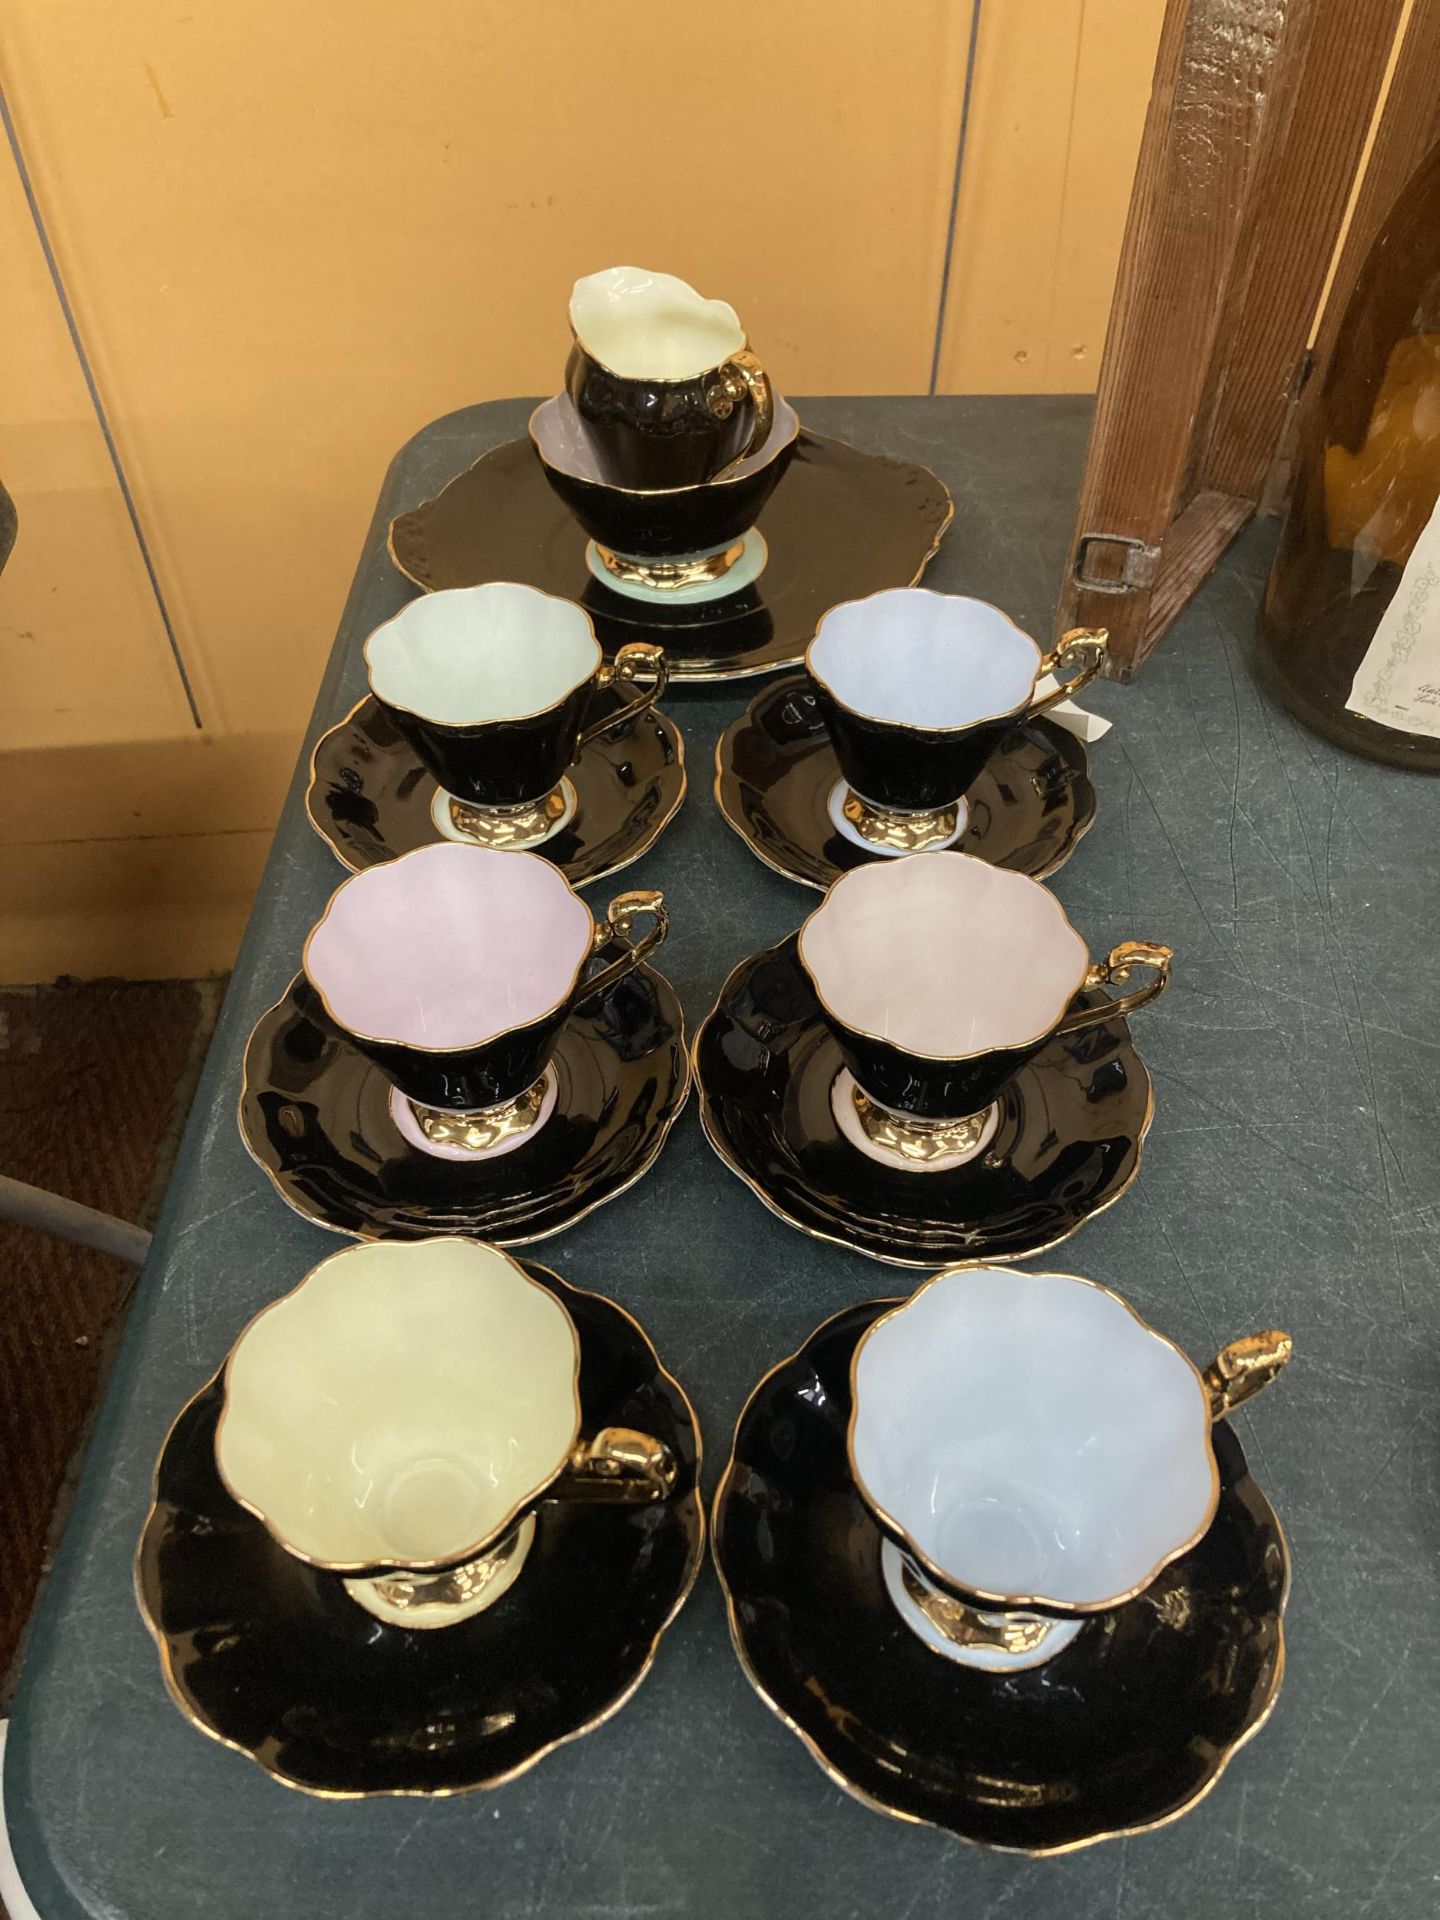 A VINTAGE ROYAL STANDARD 'HARLEQUIN' TEASET - BLACK WITH DIFFERENT COLOURED INTERIORS- TO INCLUDE